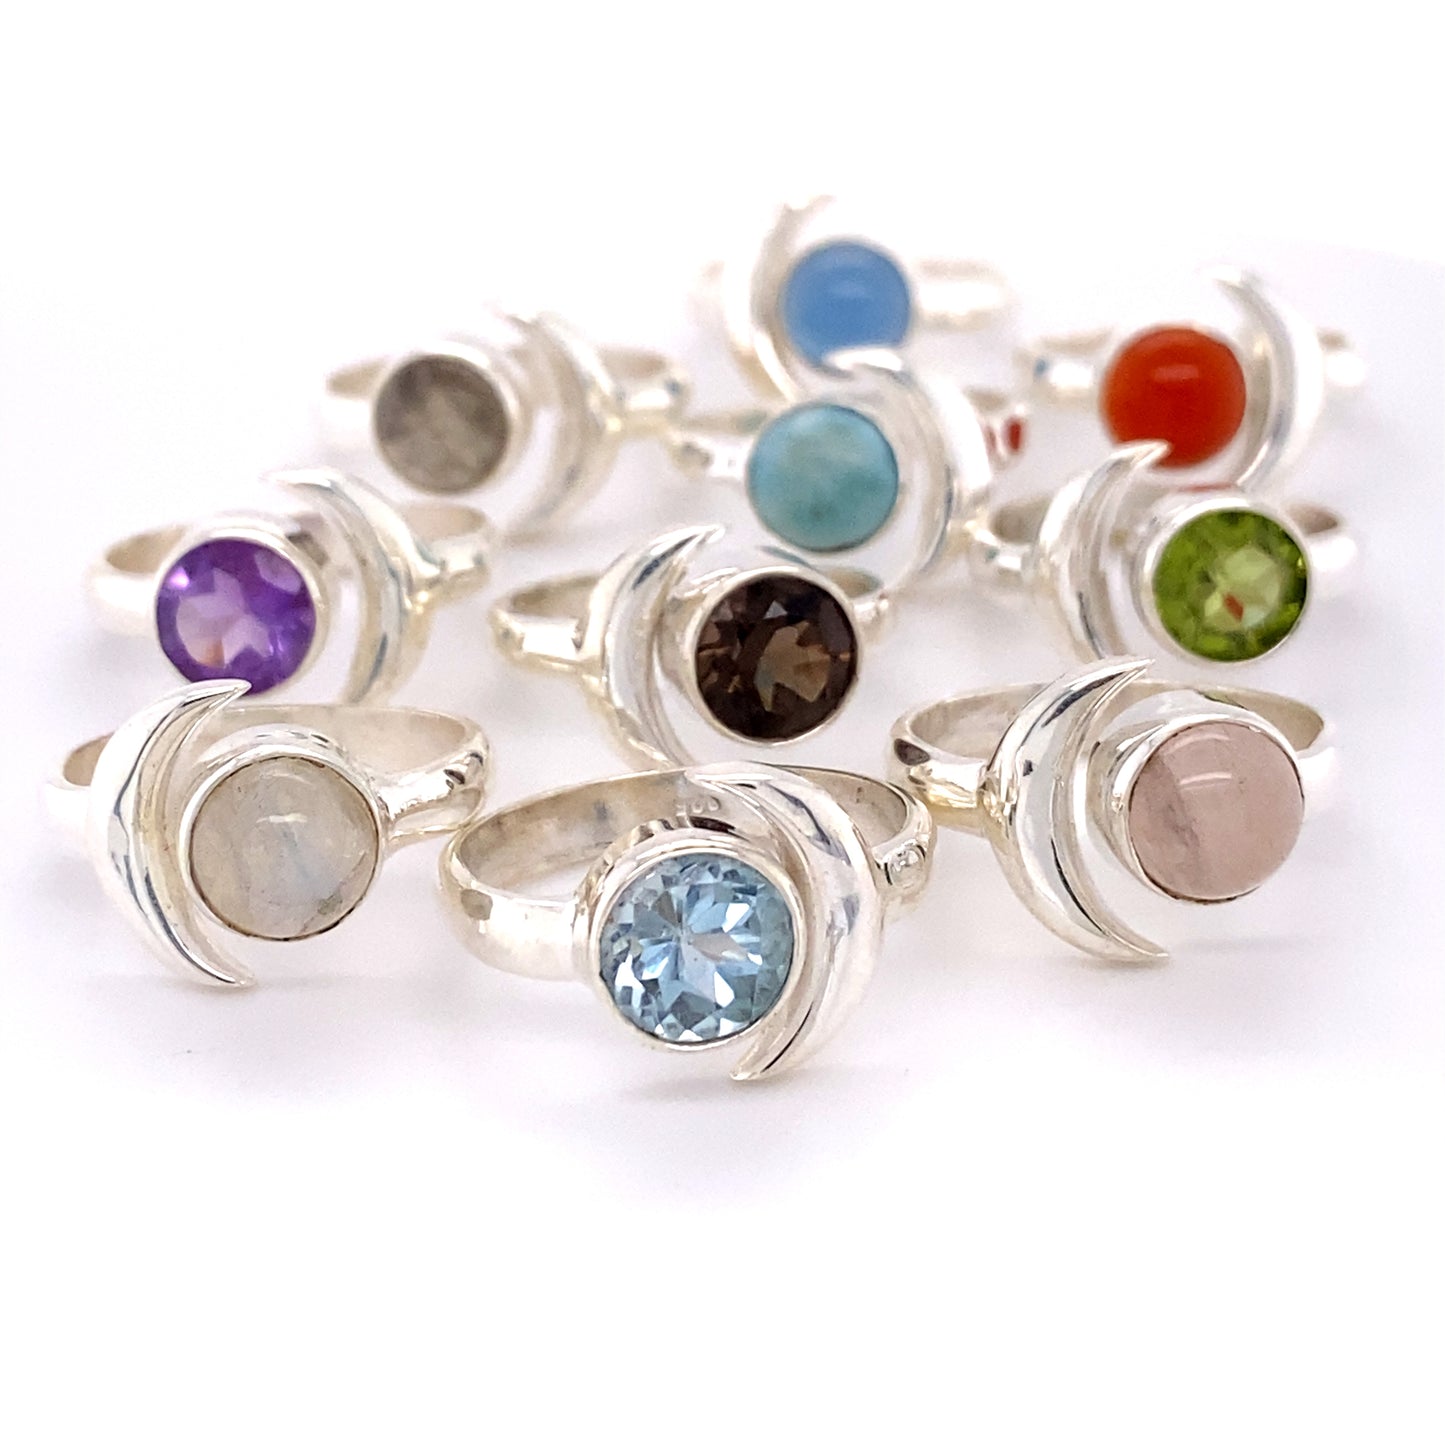 A group of Crescent Moon Rings with Natural Gemstones.